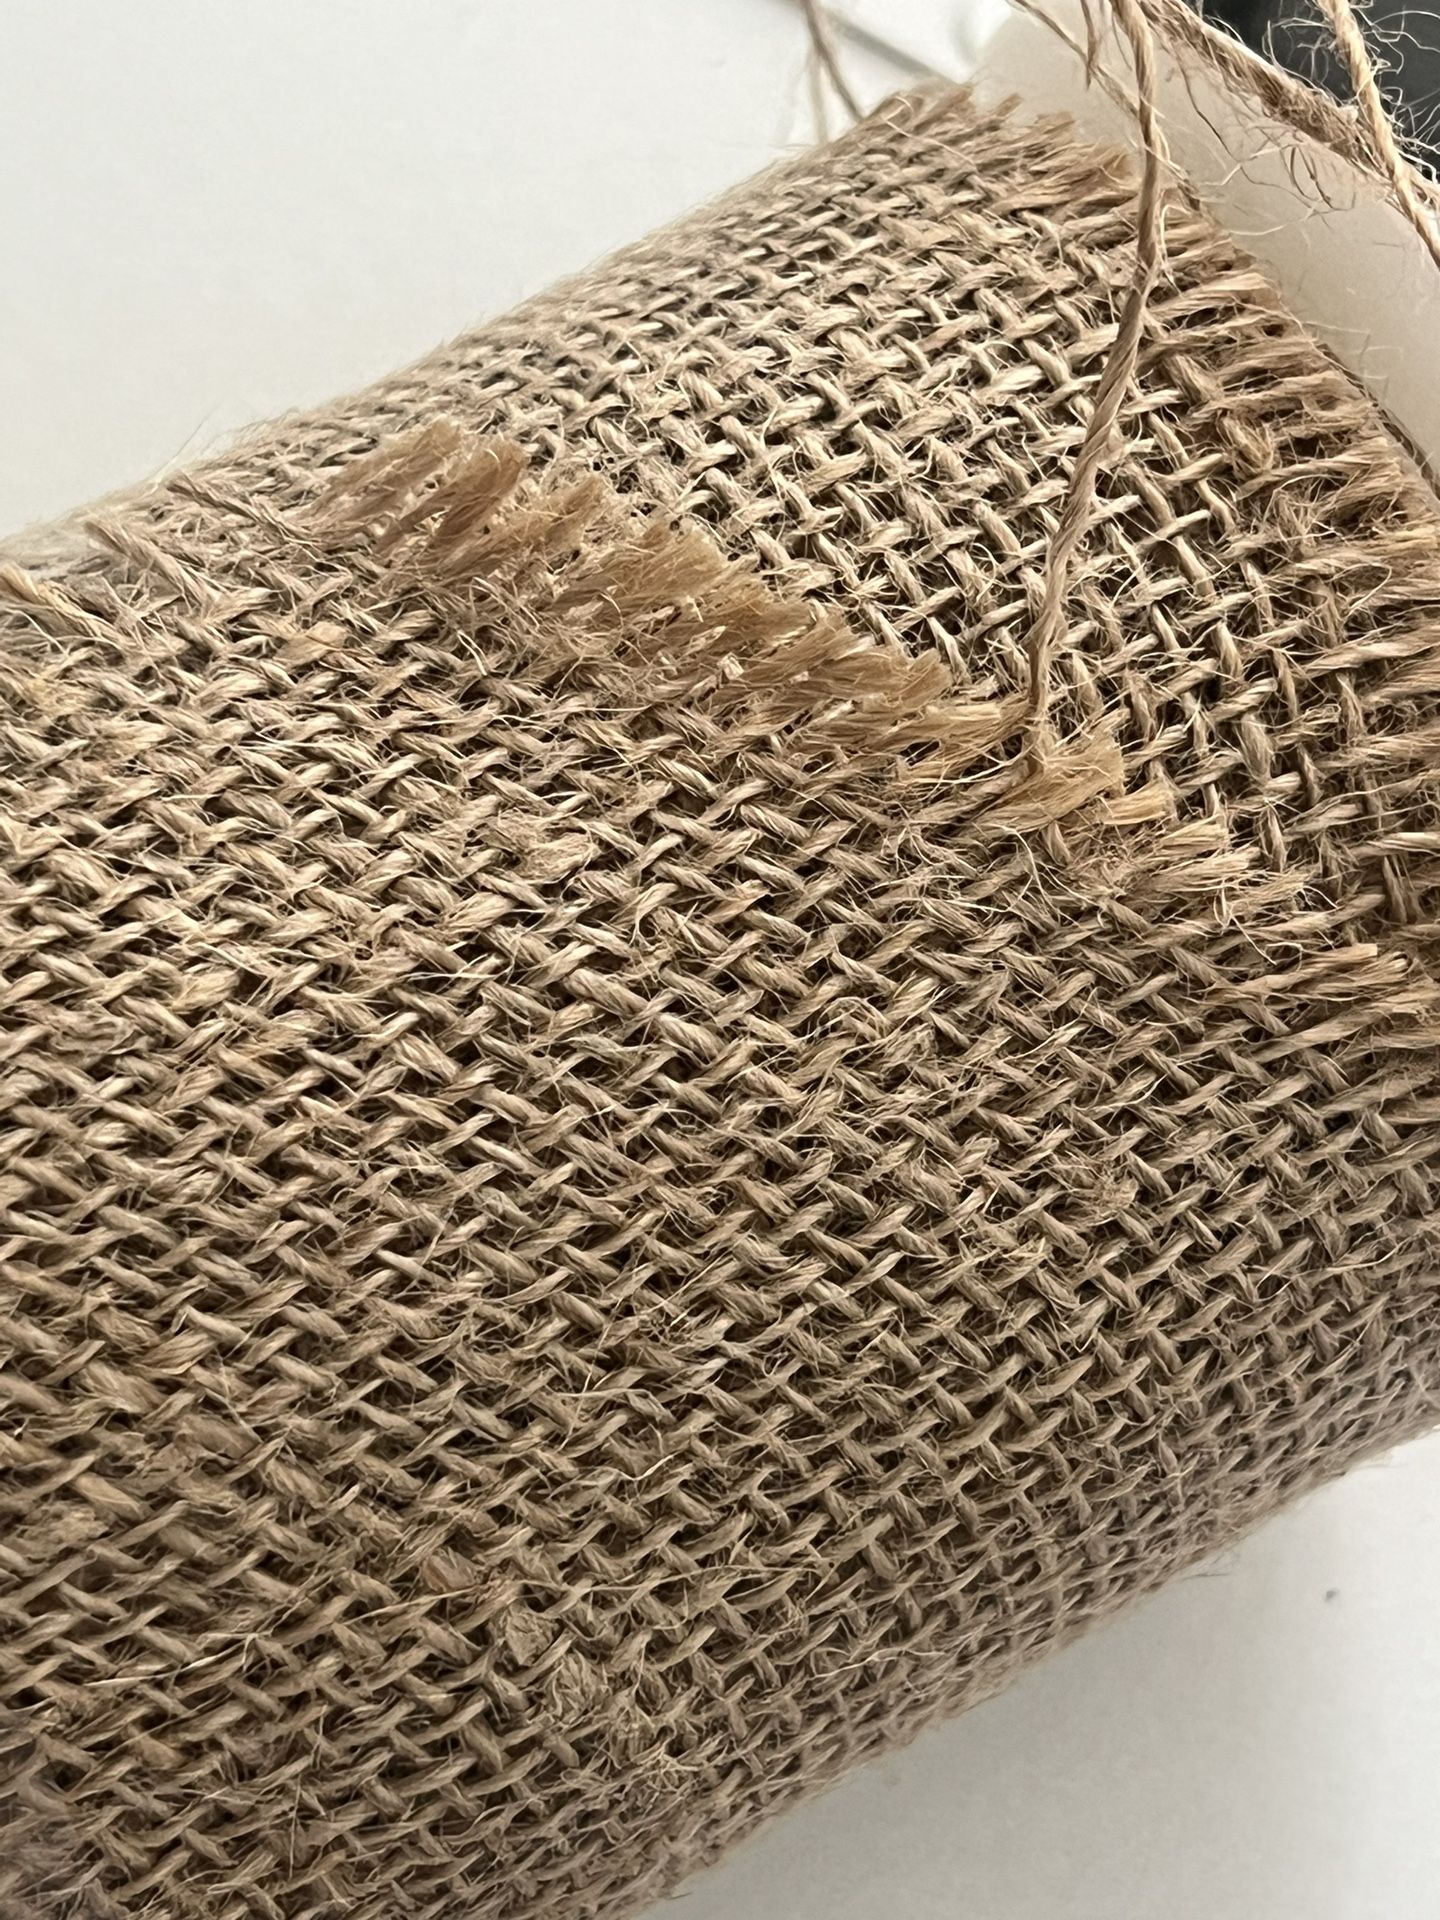 Burlap for Arts & Crafts Project